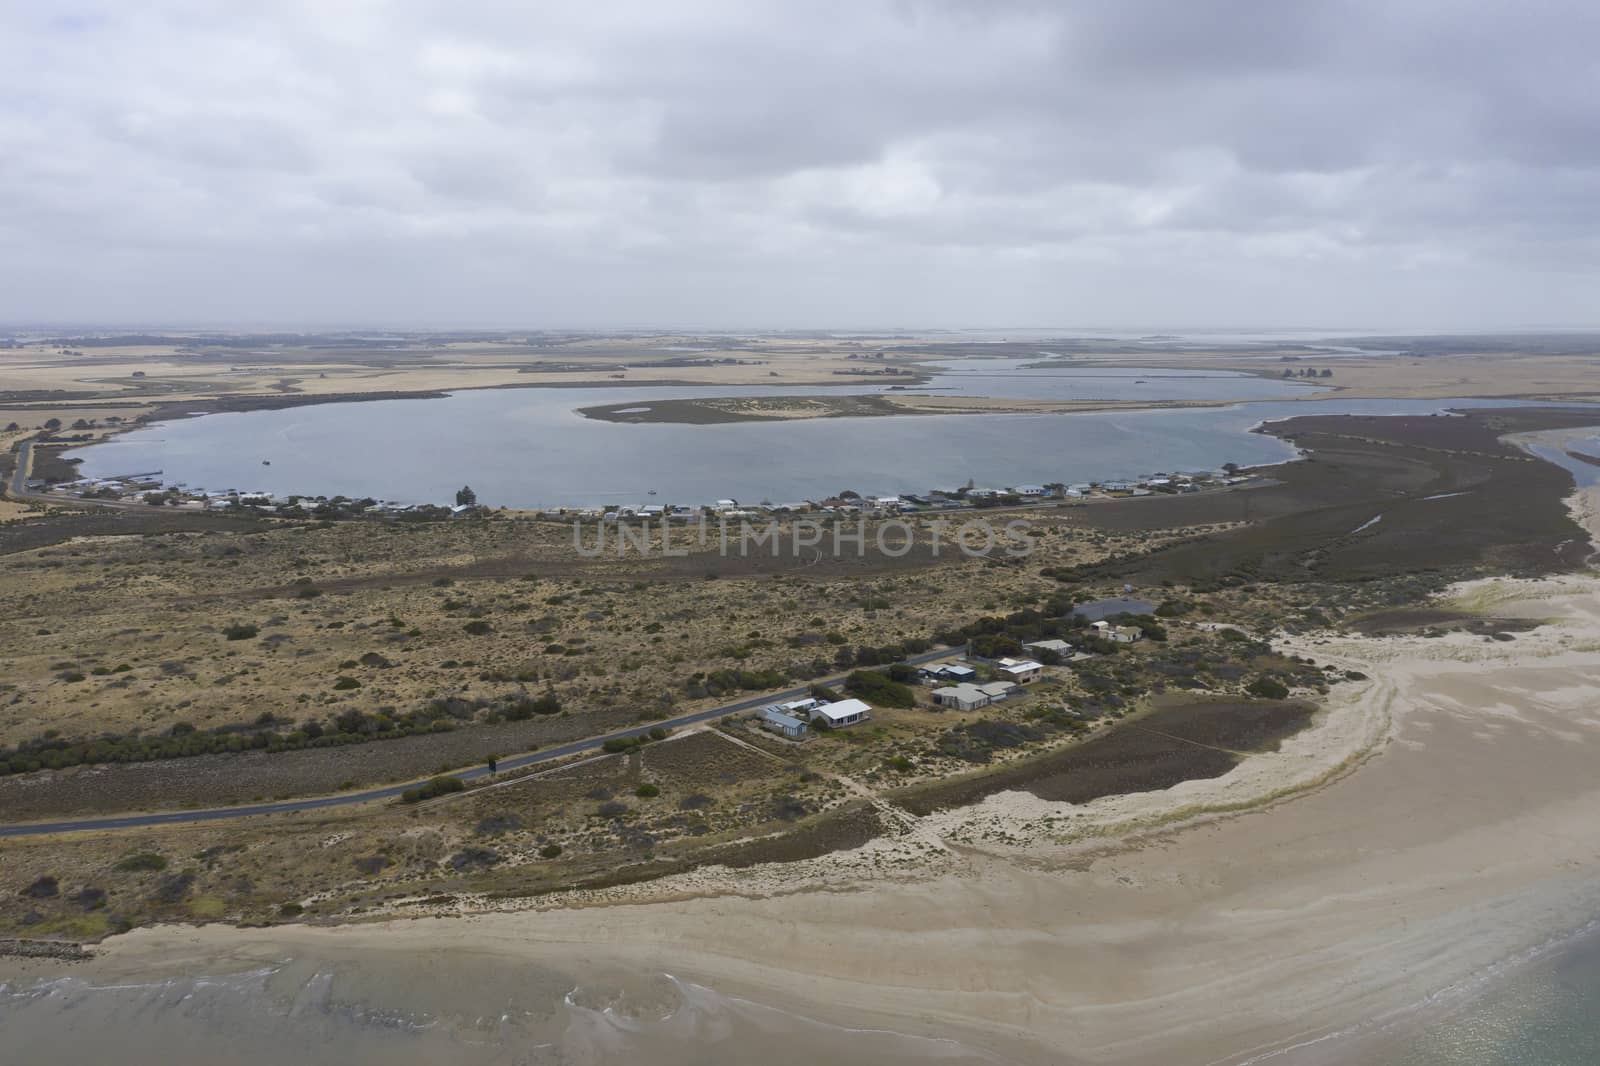 Aerial view of sand dunes at the mouth of the River Murray in regional South Australia in Australia by WittkePhotos